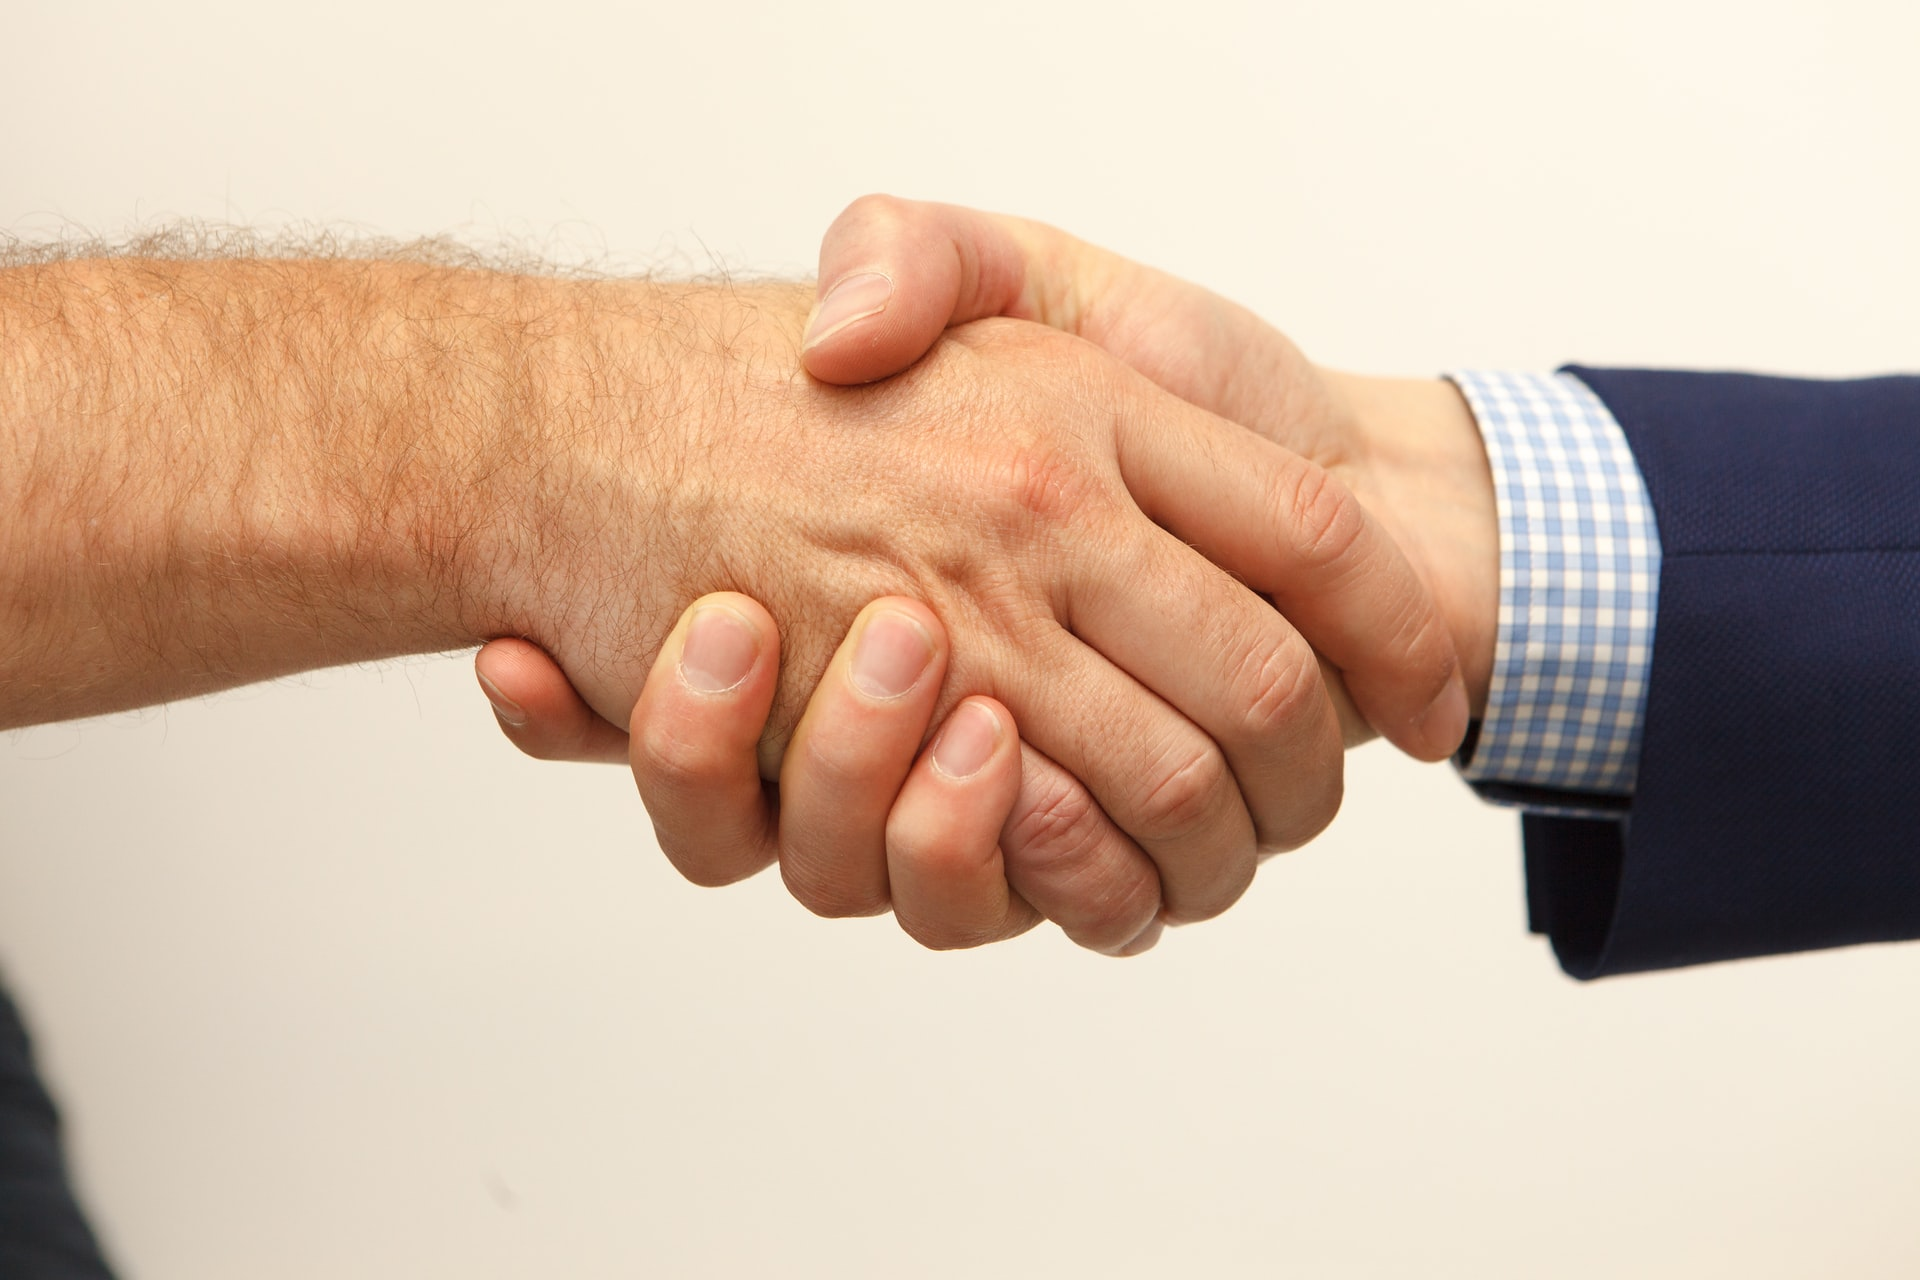 A firm hand shake that shows cooperation